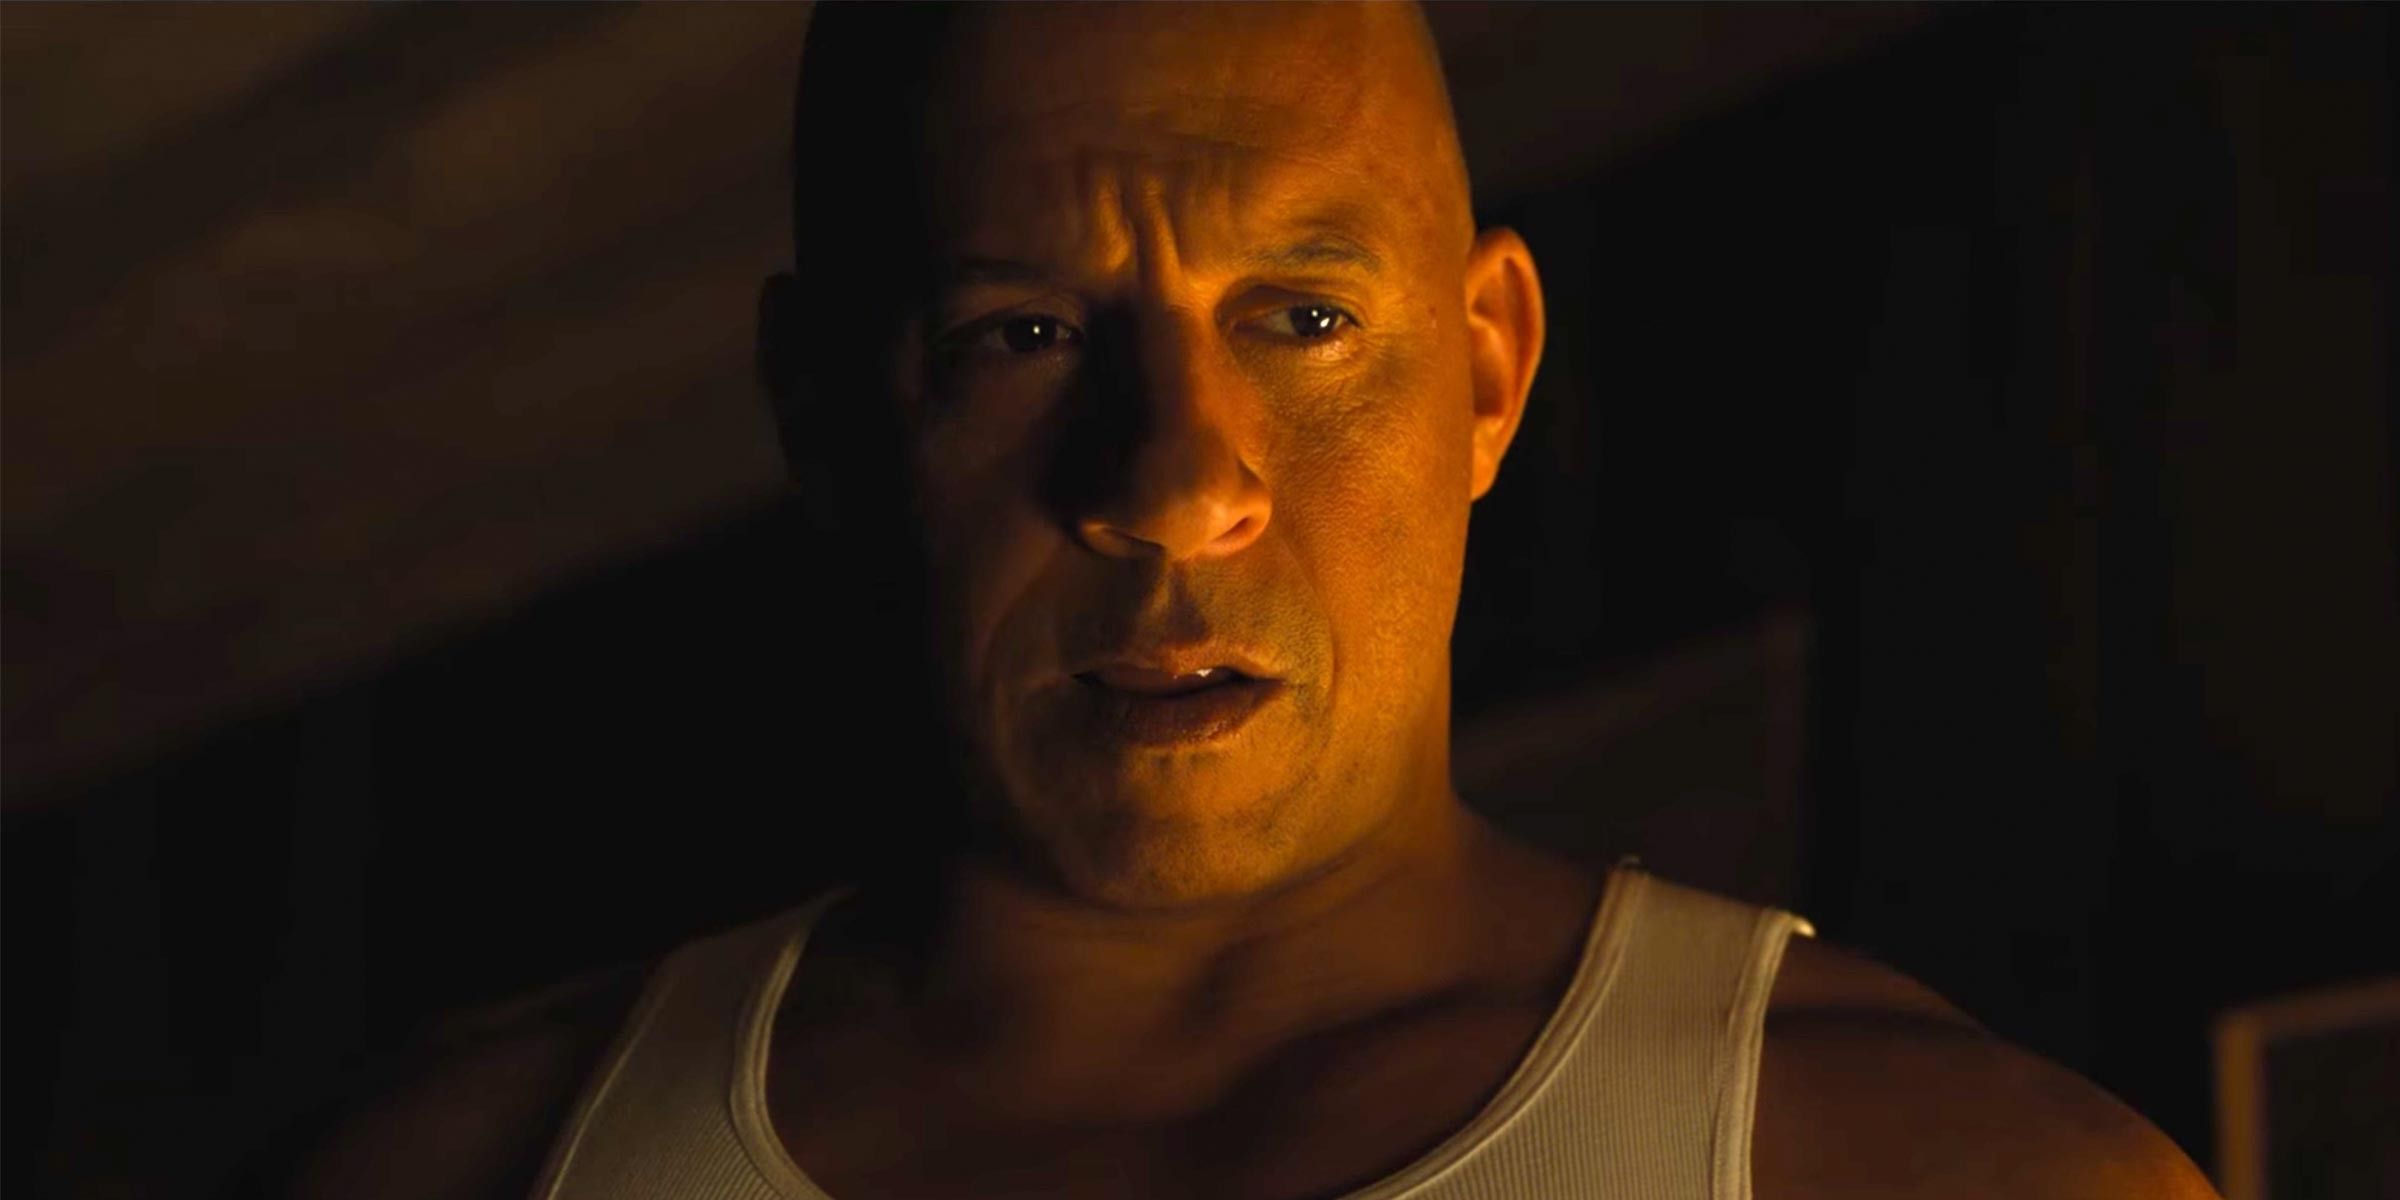 Vin Diesel in Fast and Furious 9